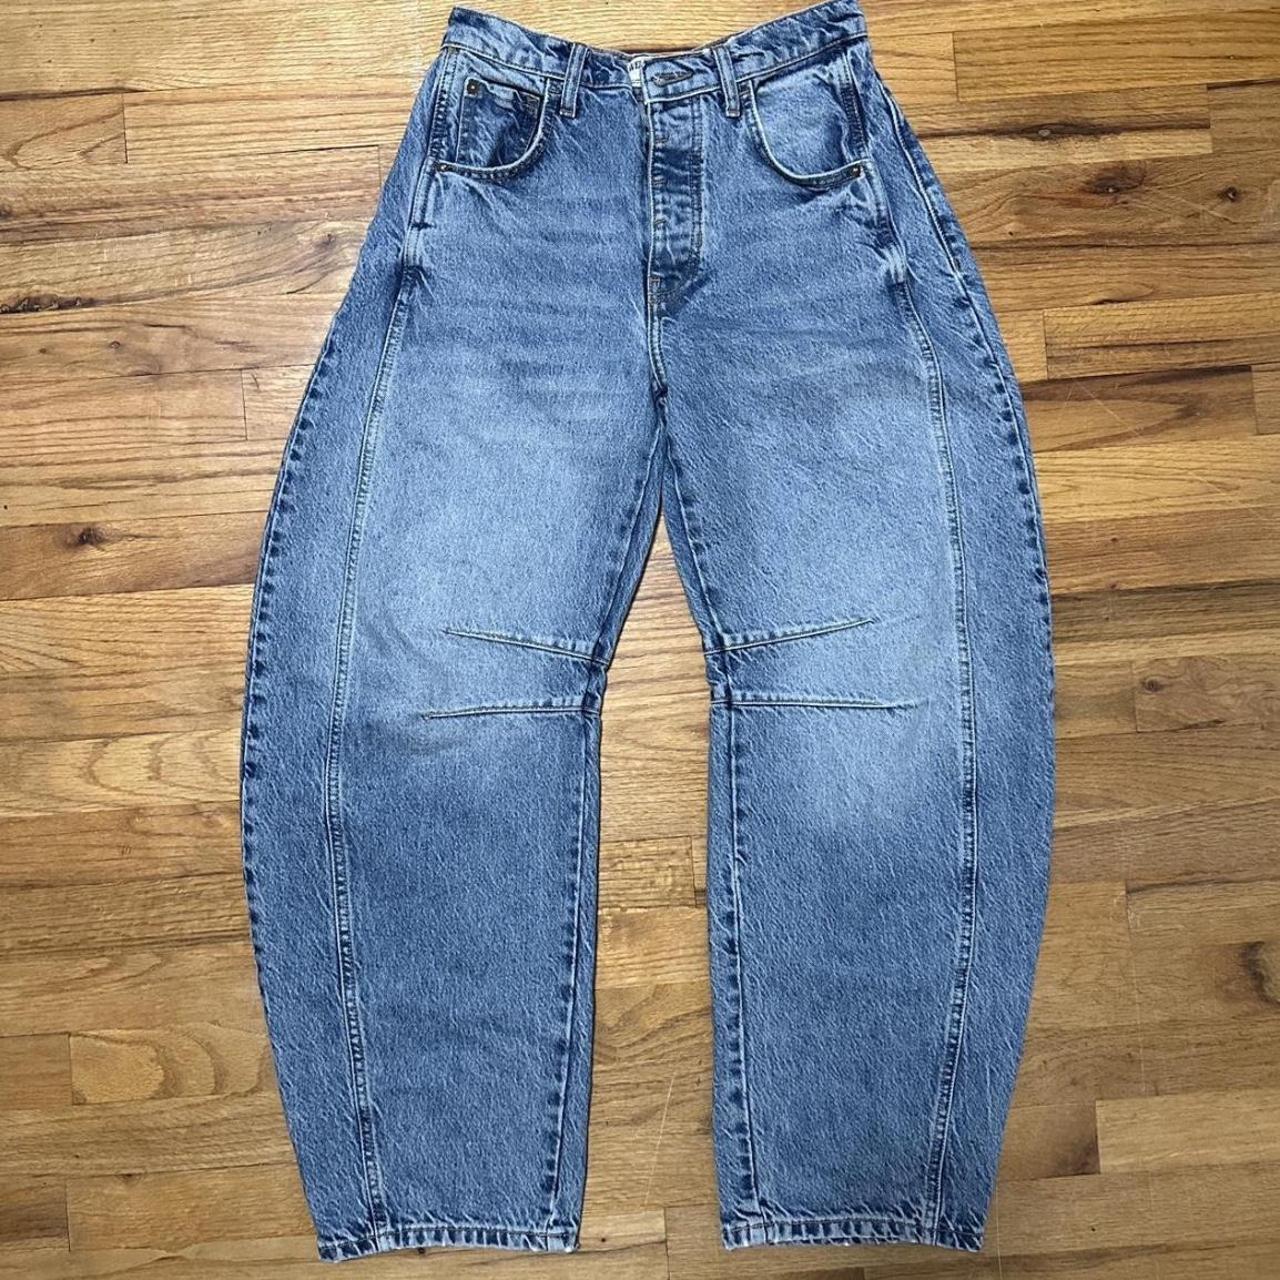 Free People barrel jeans size 24. Brand new with... - Depop